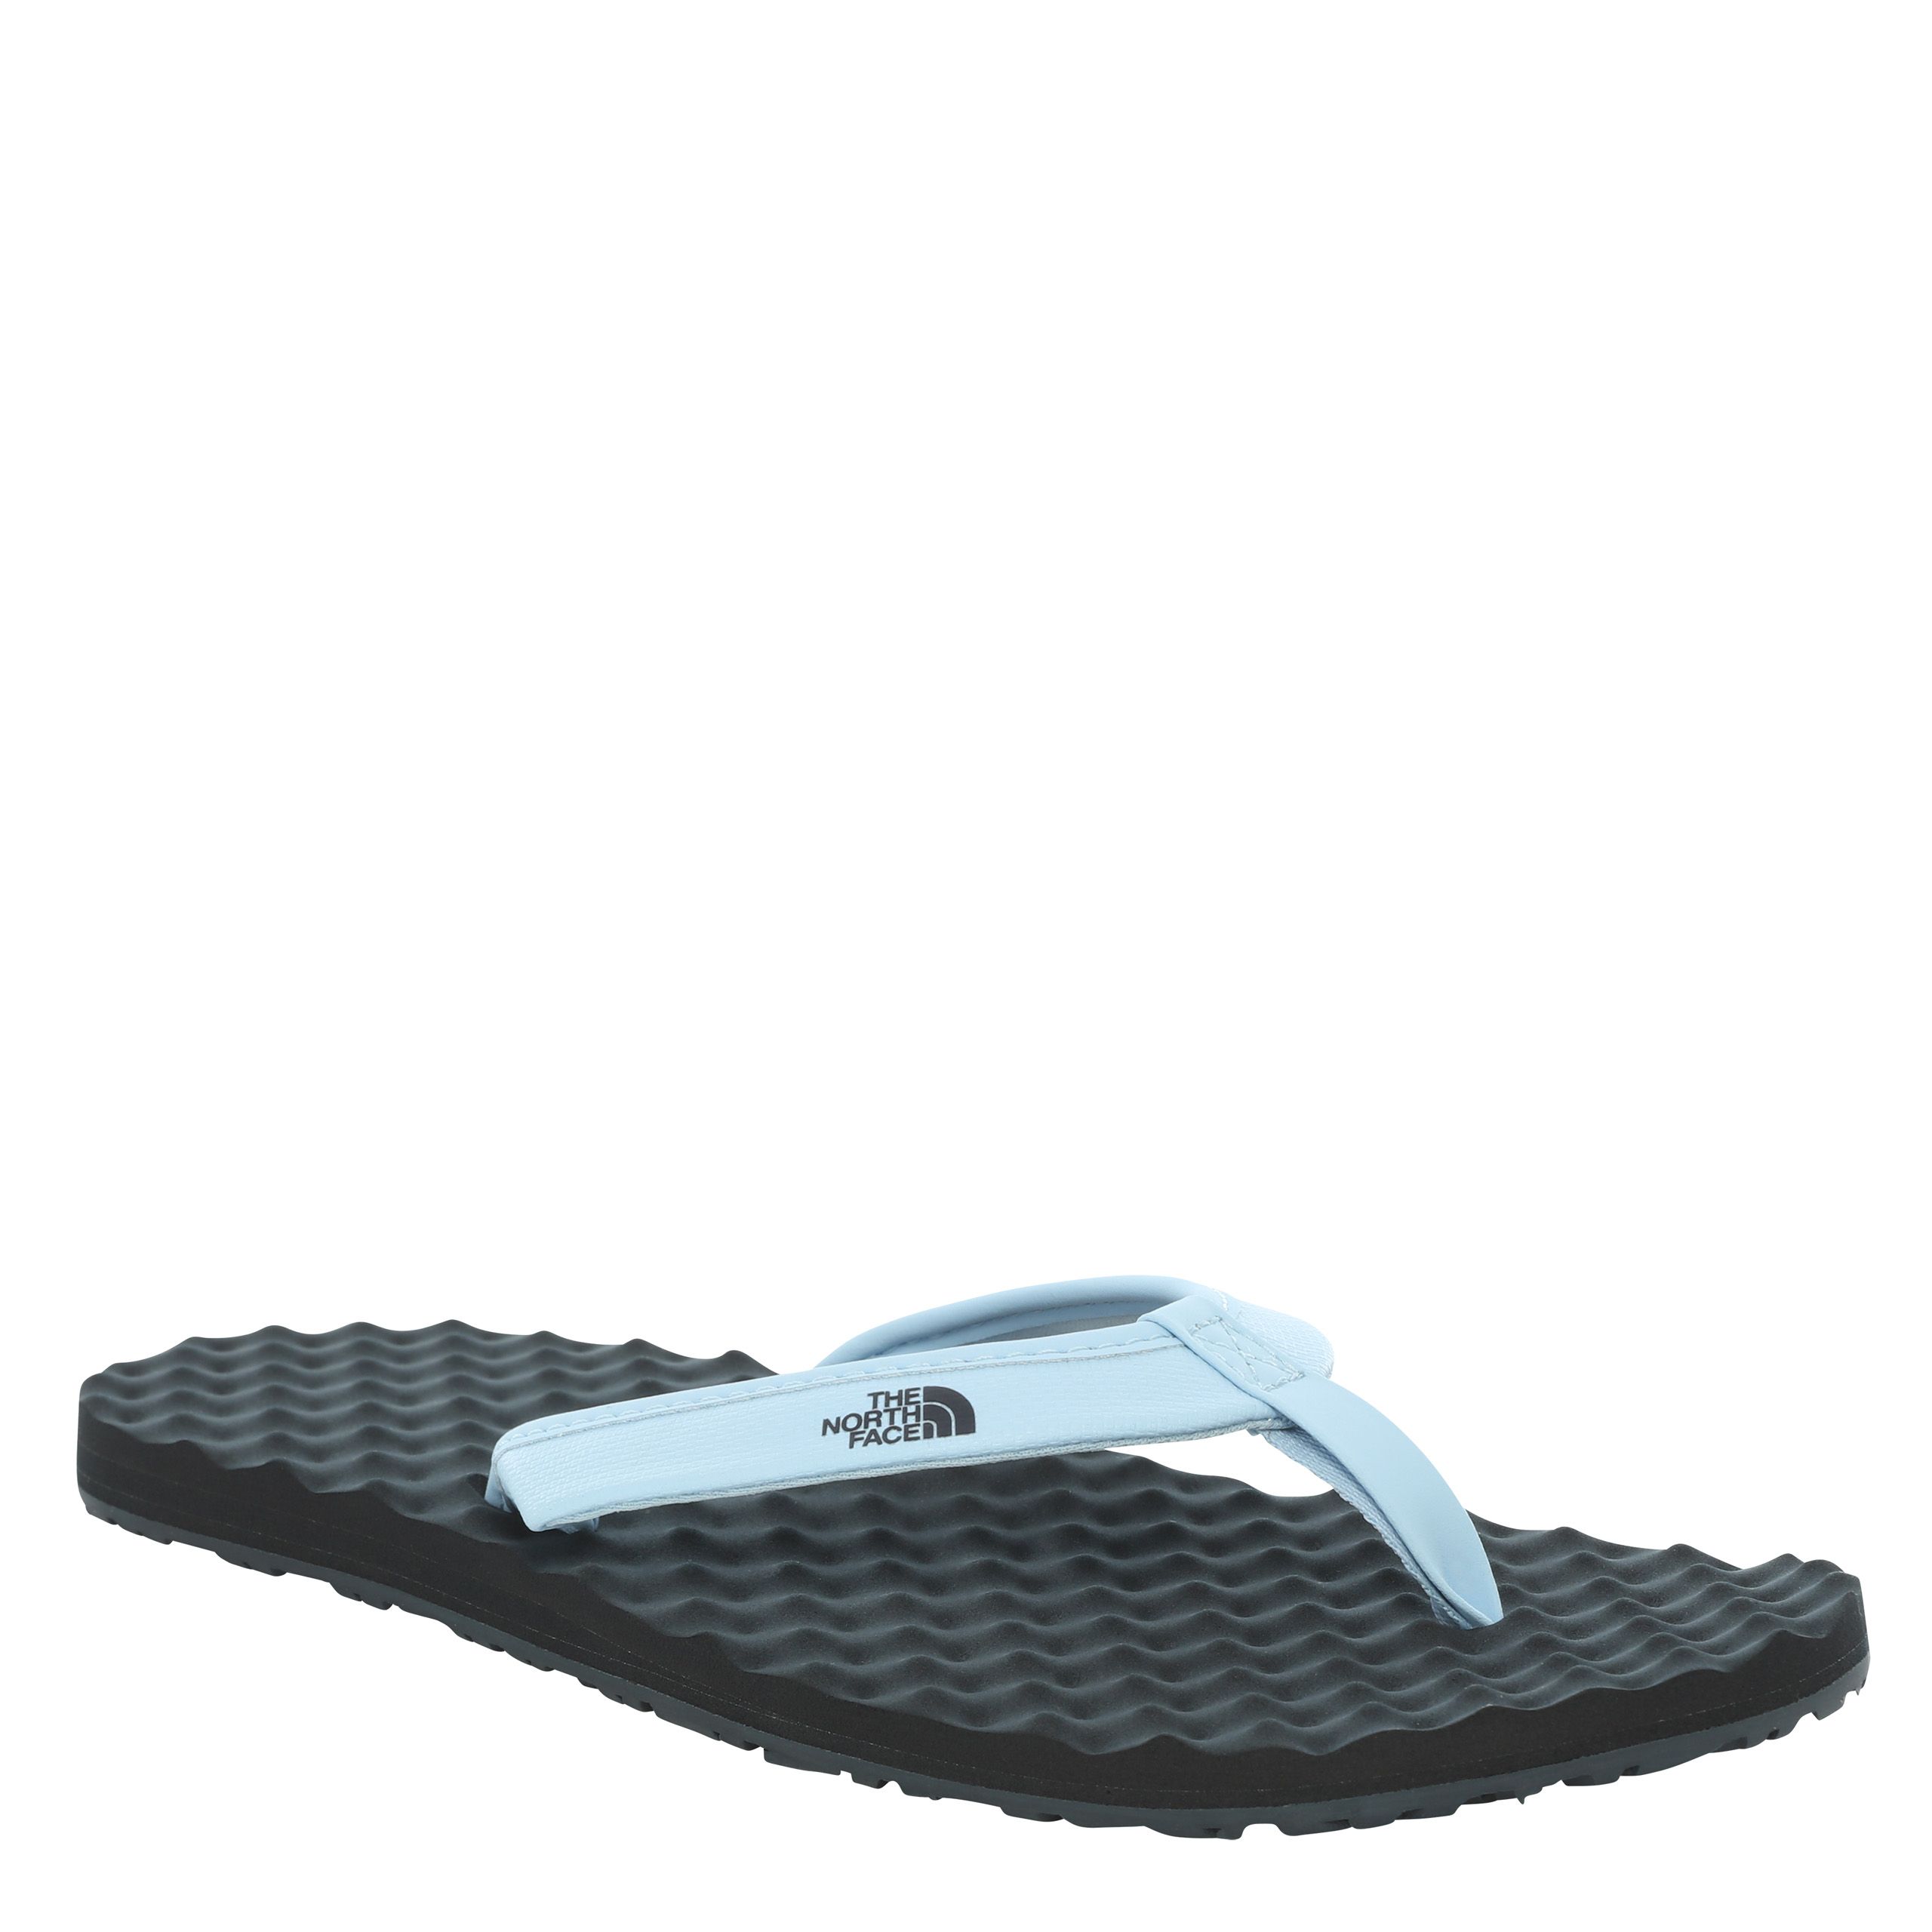 The North Face Womens Basecamp Flip Flops